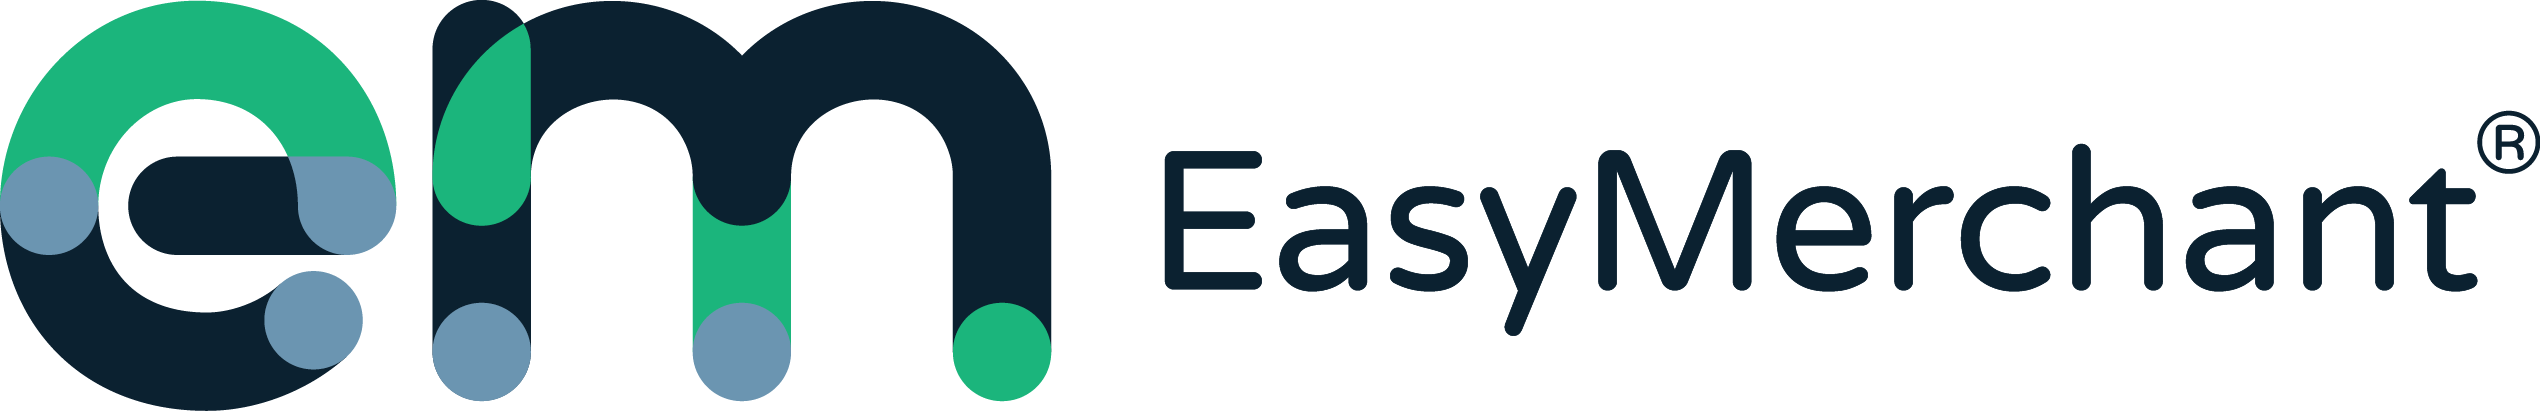 Easymerchant Limited